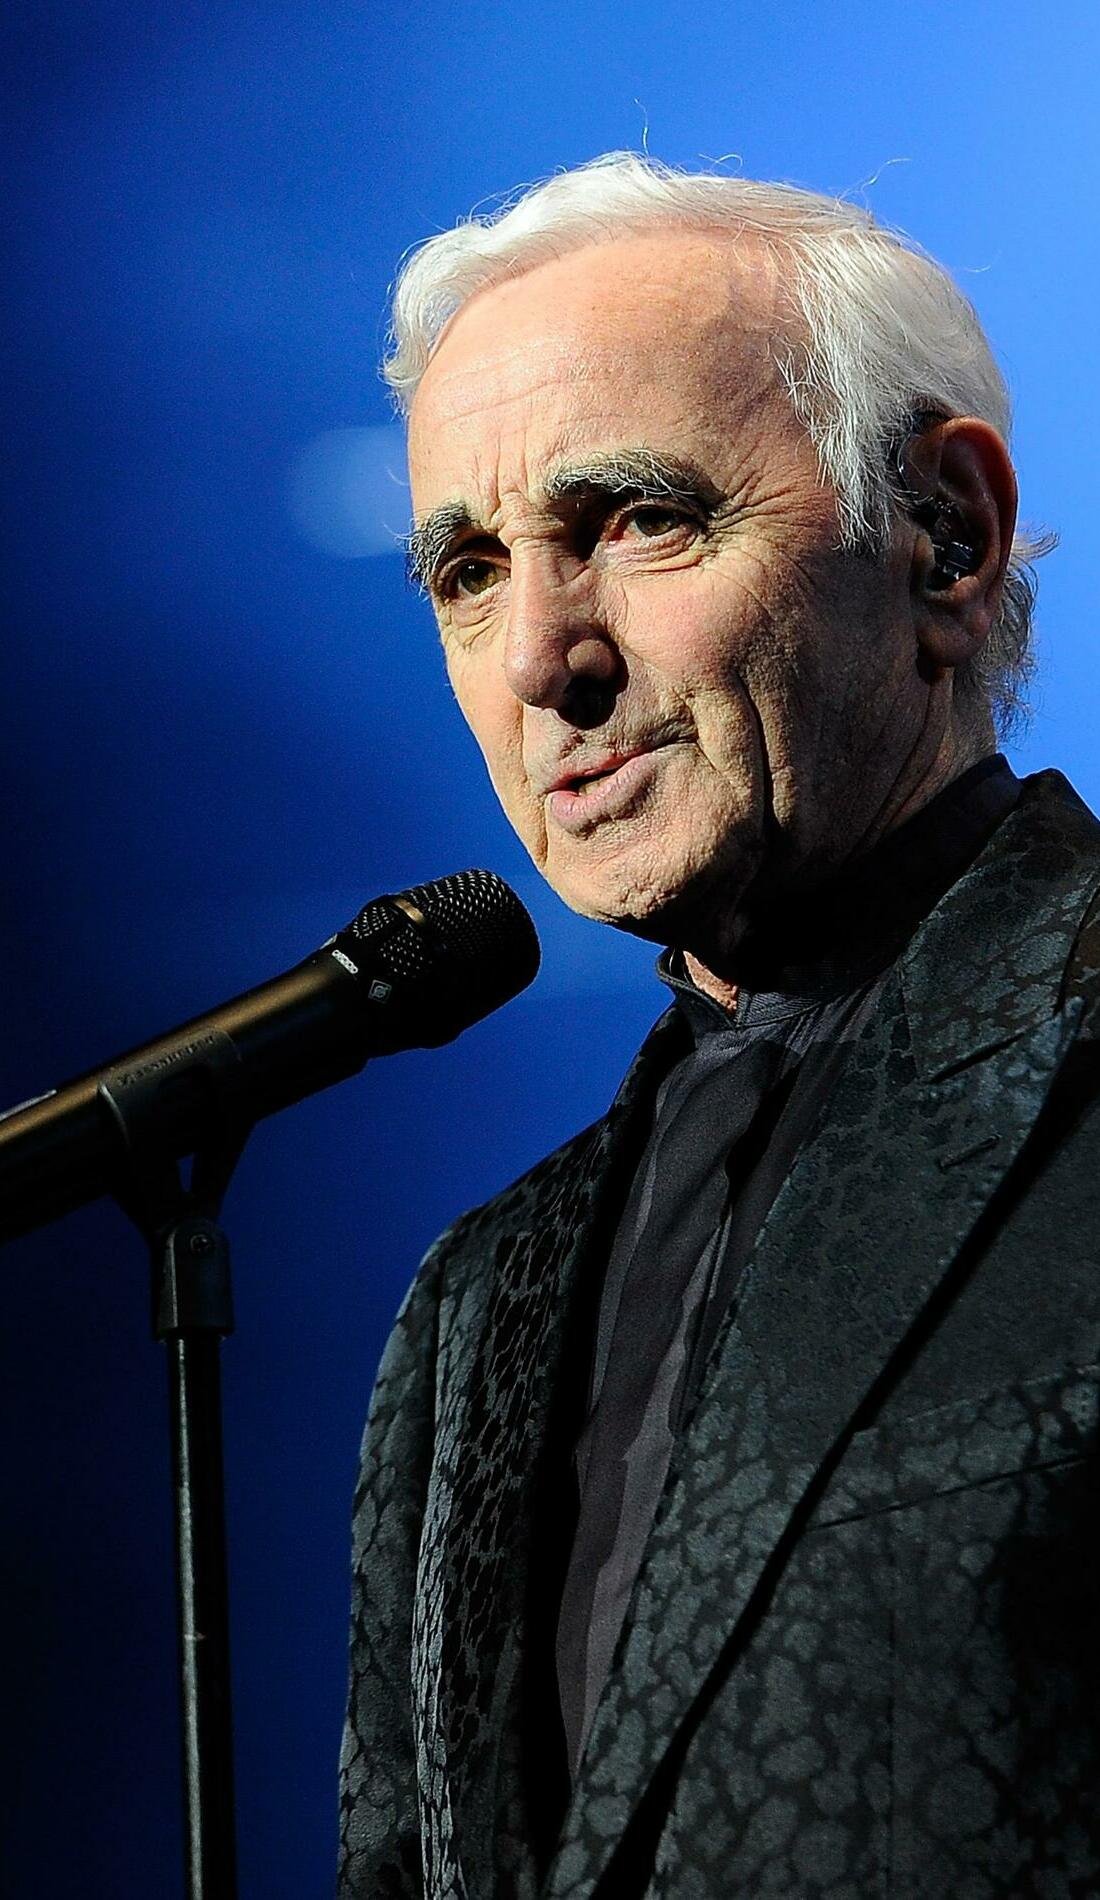 A Charles Aznavour live event